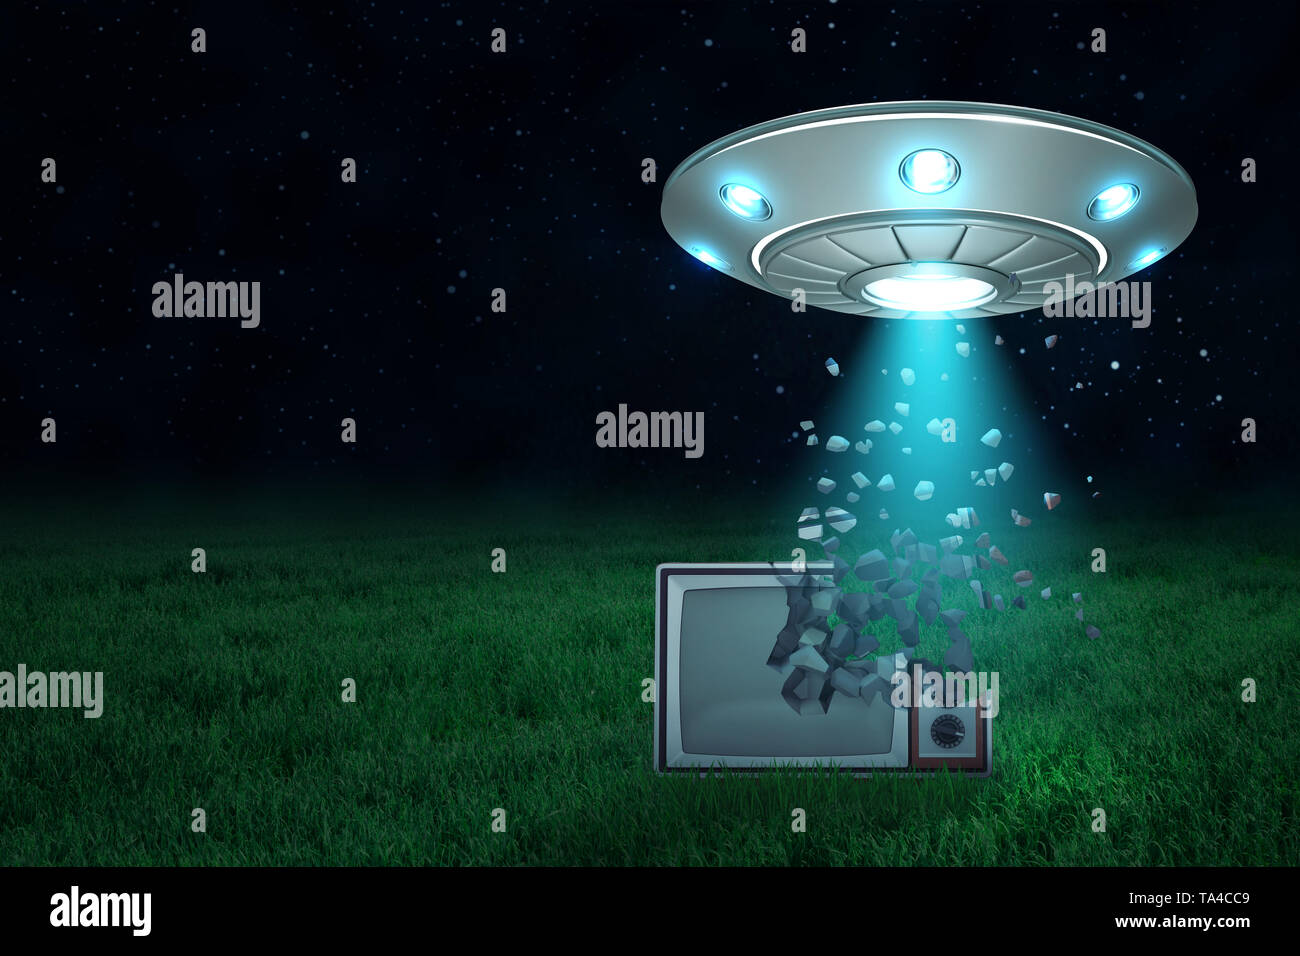 3d rendering of UFO in air at night with light coming out of its open hatch onto old TV set starting to dissolve into particles on green lawn. Stock Photo